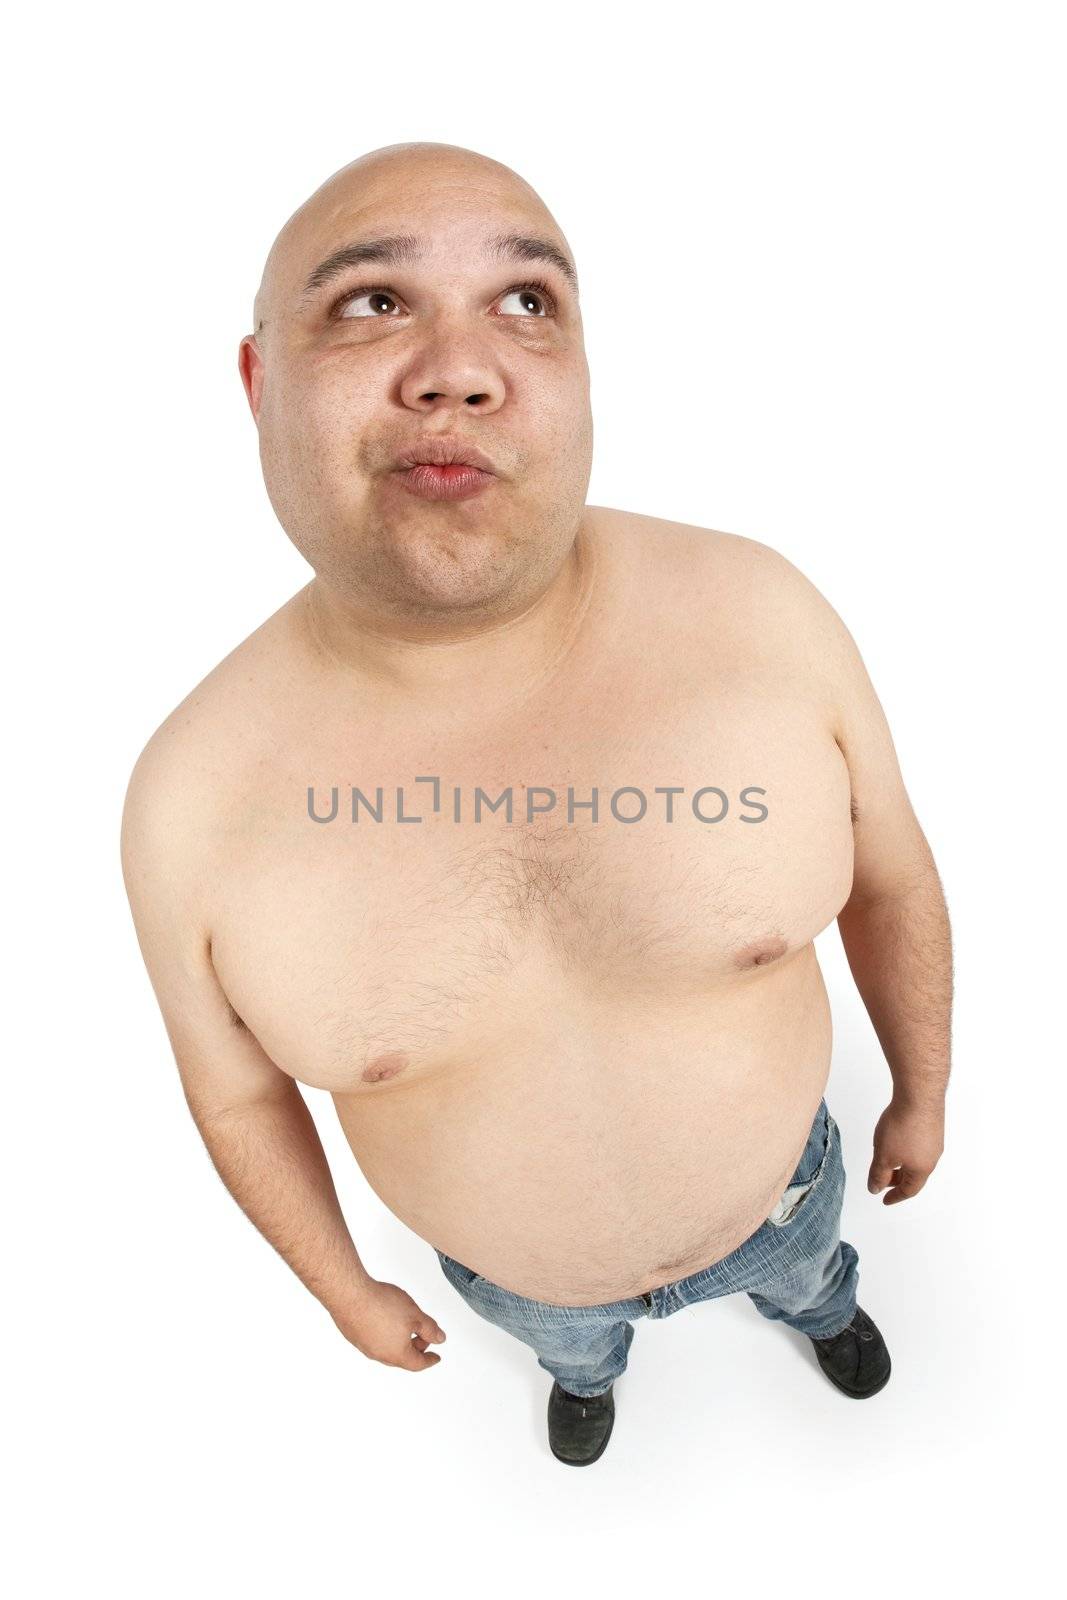 Overweight male pondering while shirtless - taken with fish-eye lens for exaggerated expression.
